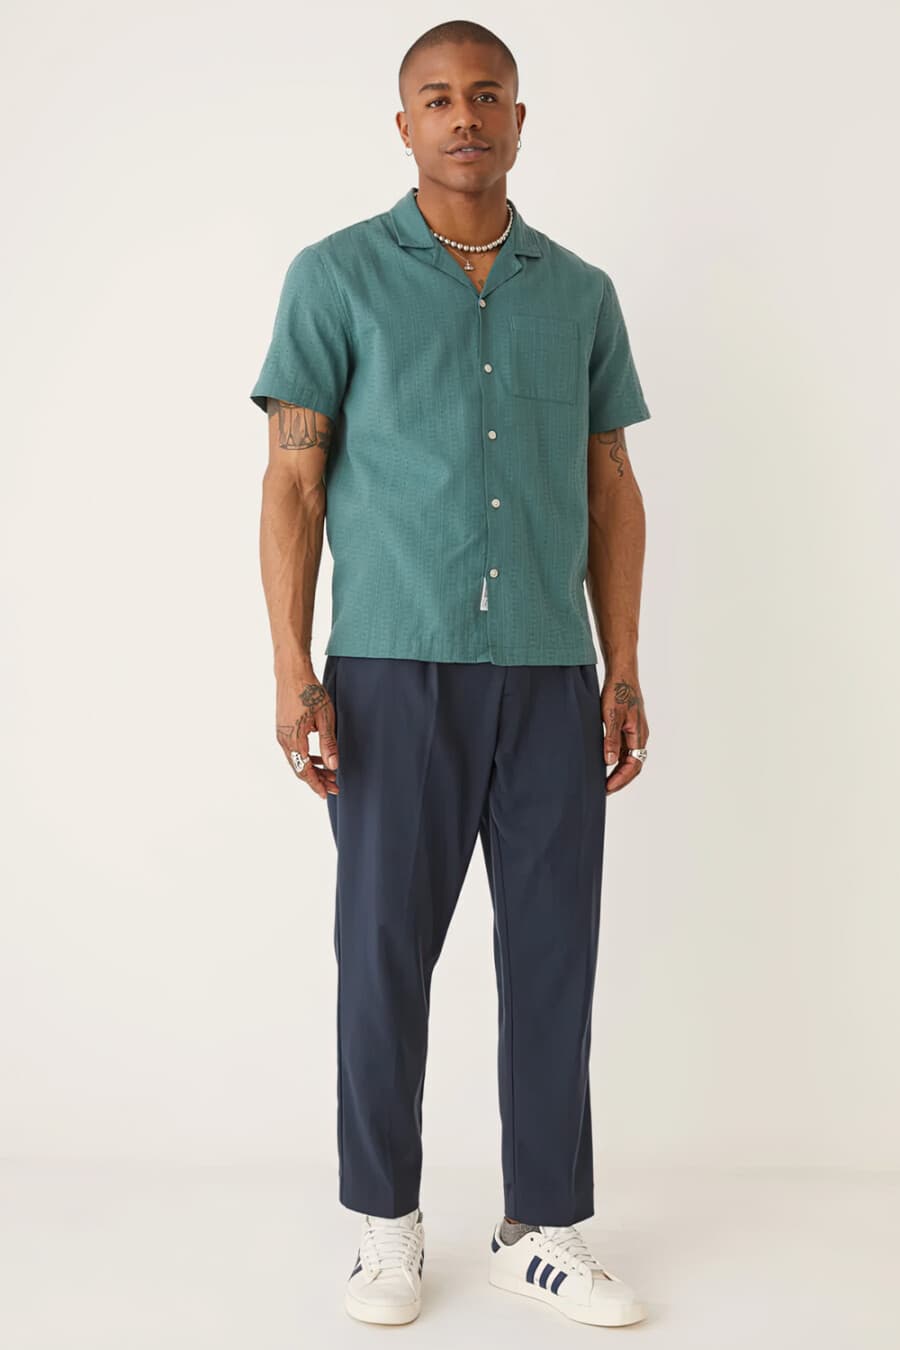 Men's aqua green short-sleeve camp collar shirt, blue loose pants, silver chunky neck chain and white adidas sneakers outfit